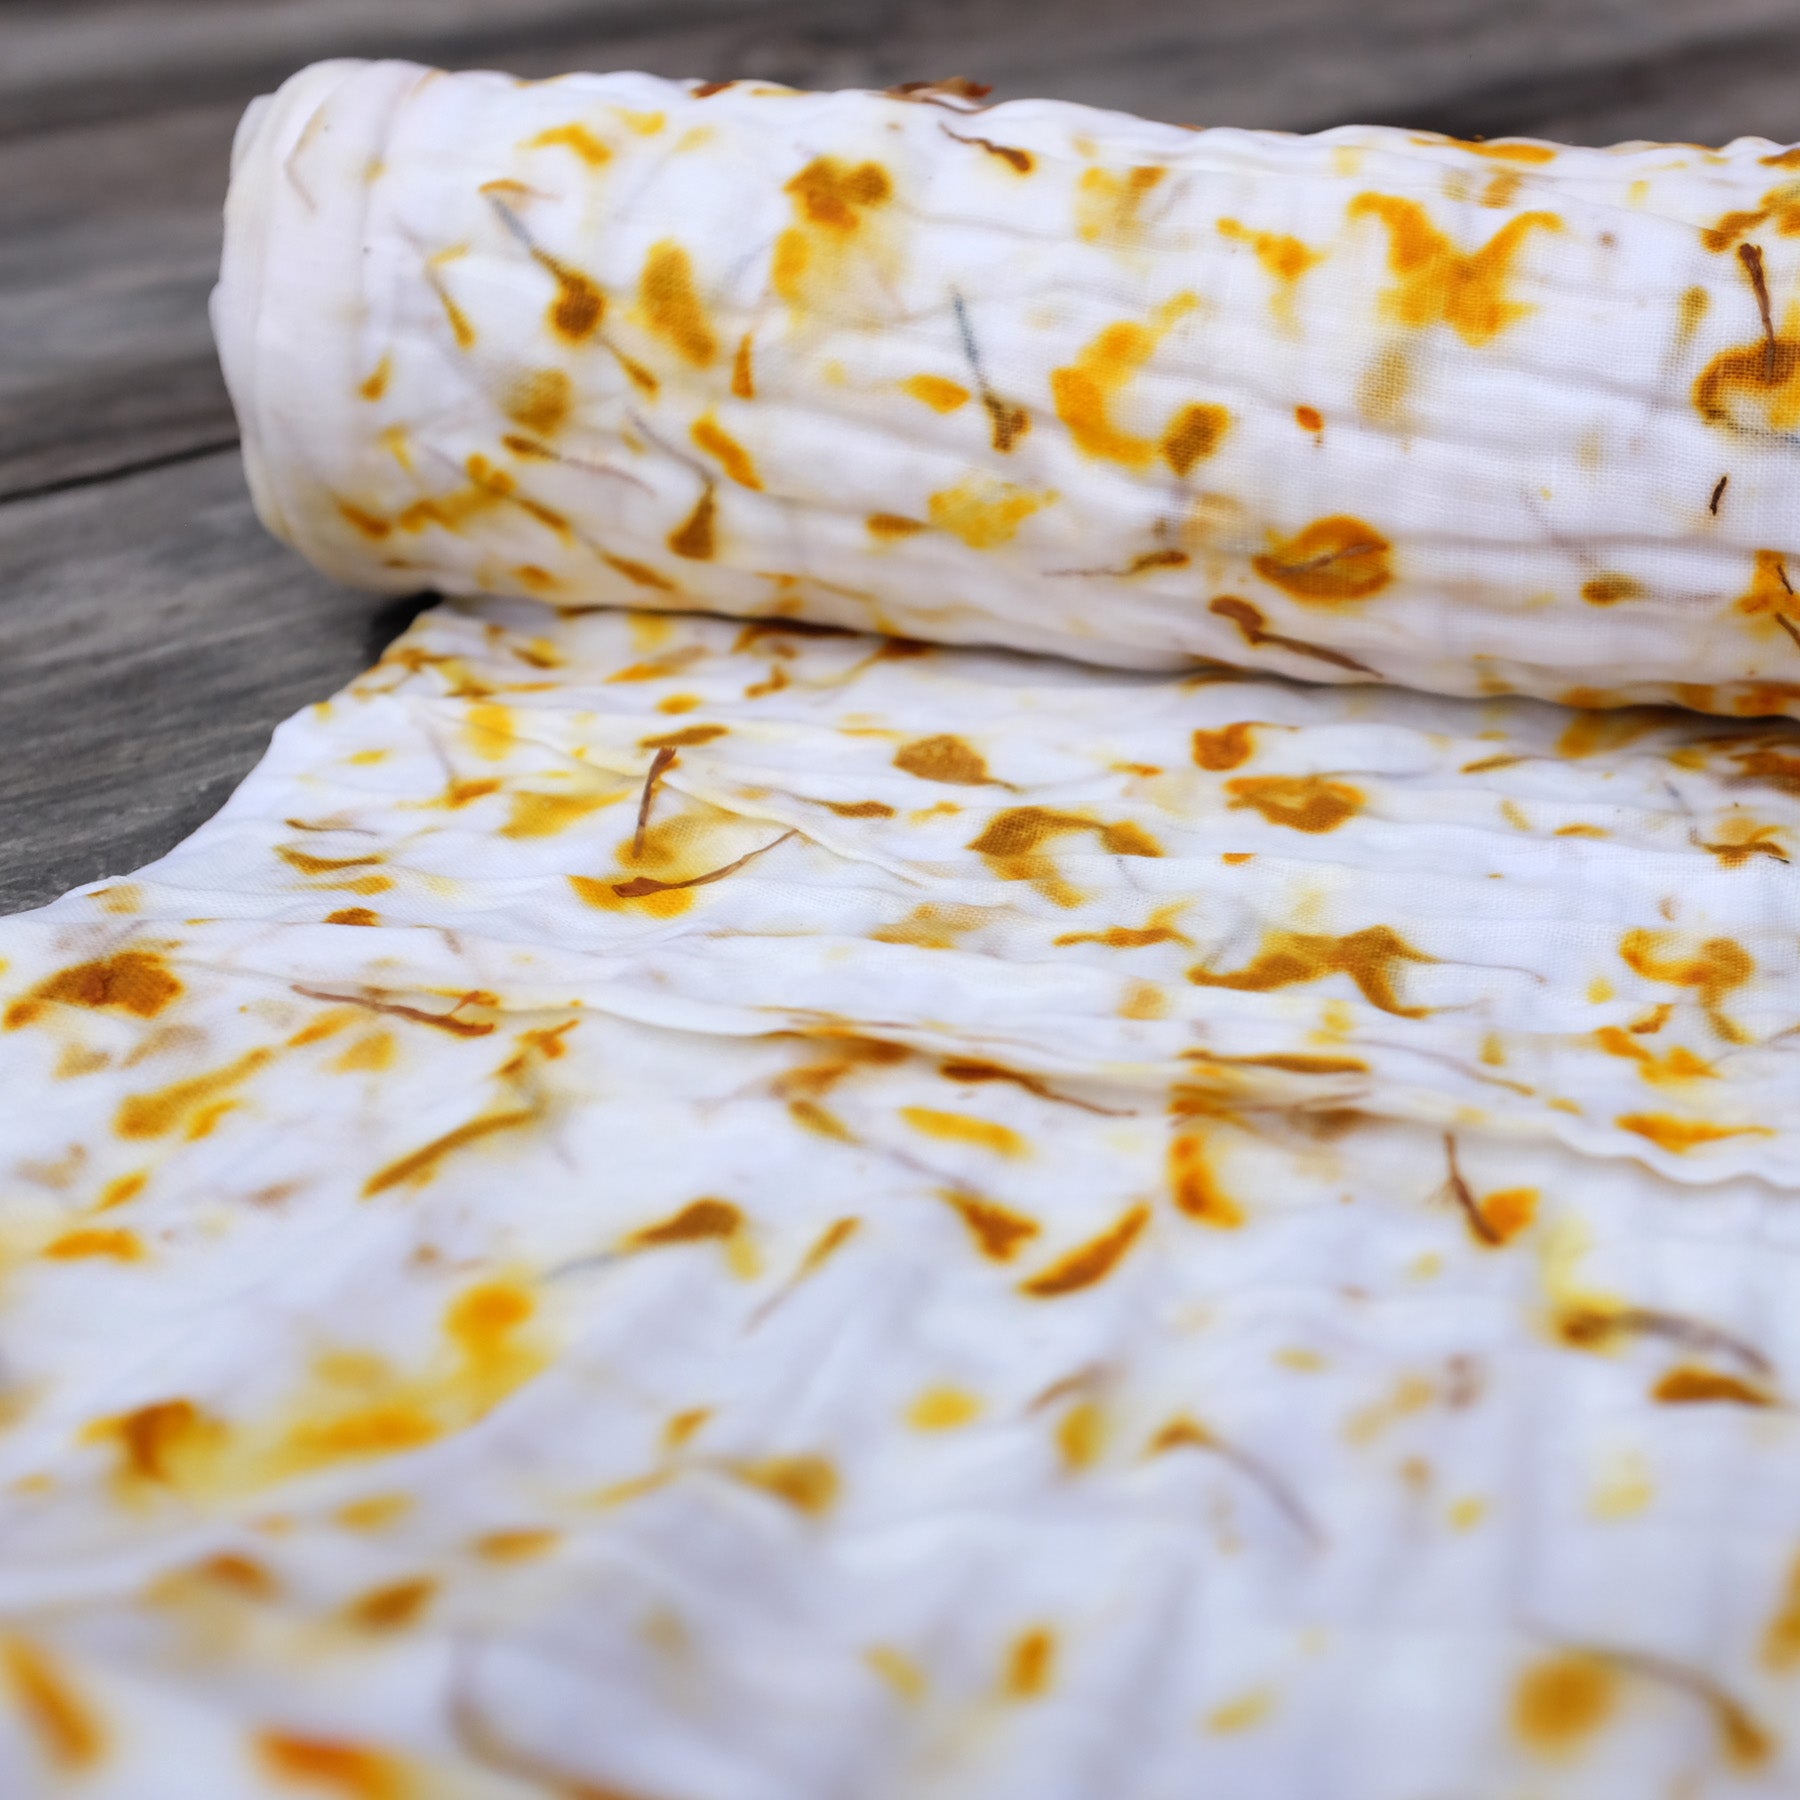 Naturally Dyed Eco-Printed Fabric - DYE-TO-ORDER